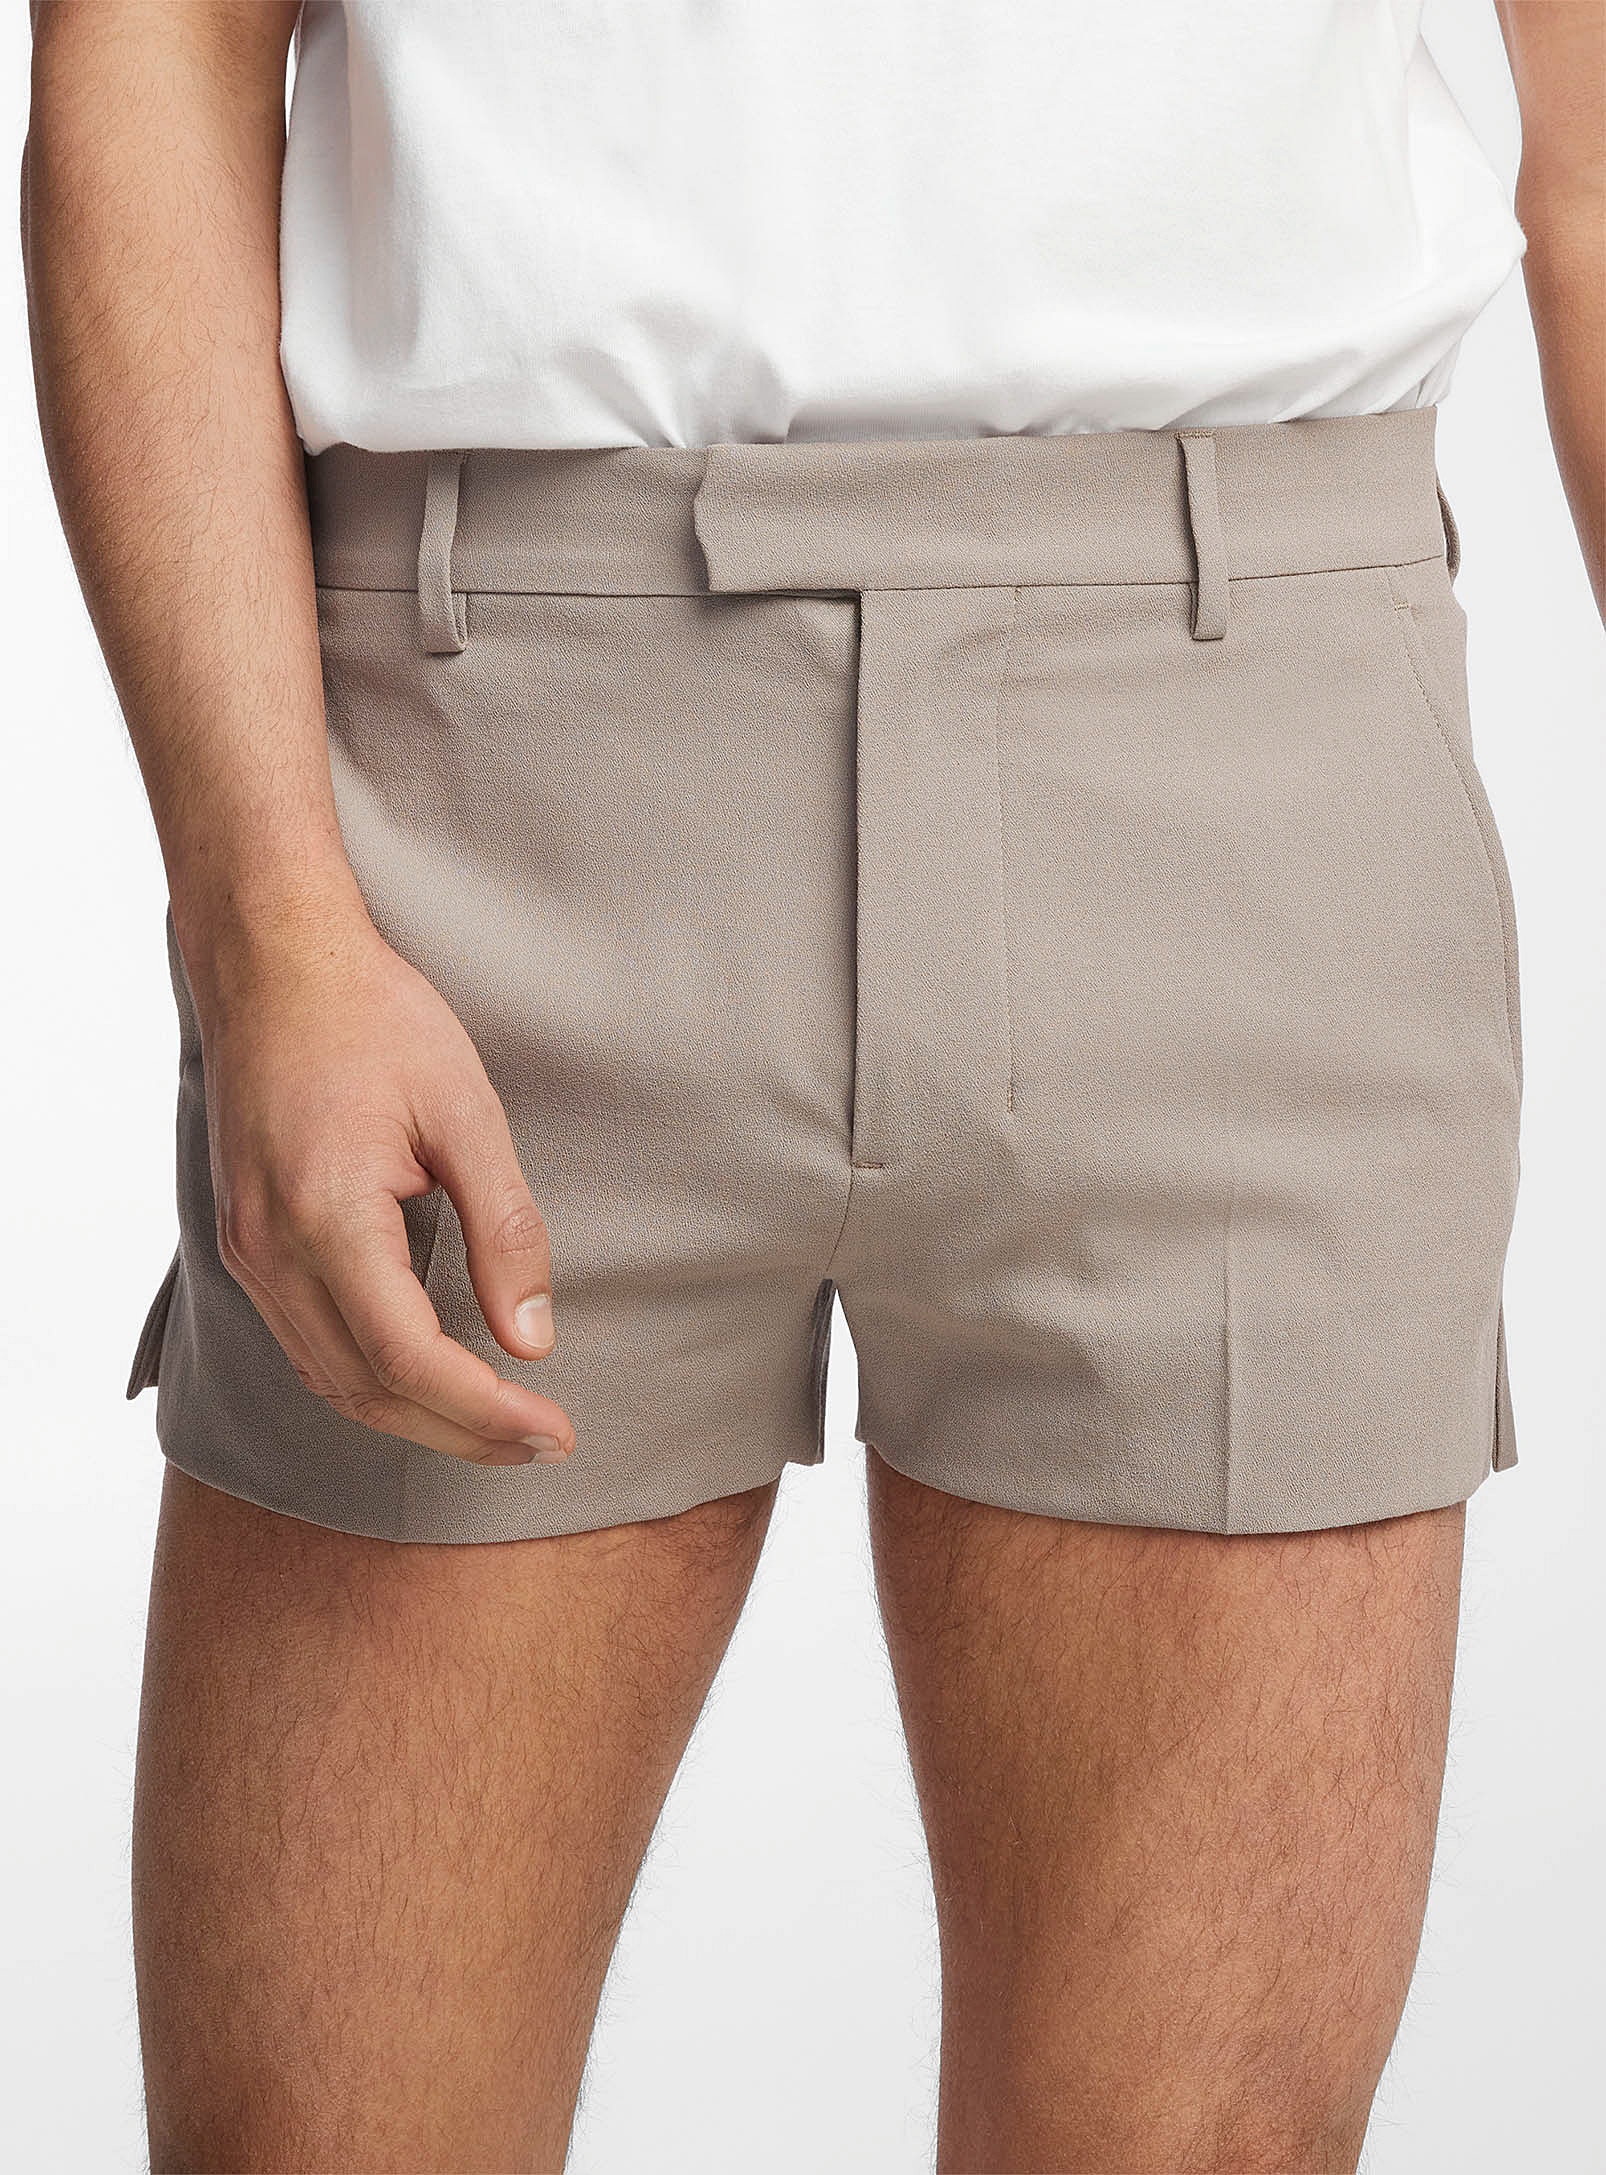 Ami Alexandre Mattiussi Crepe Wool Shorts In Taupe